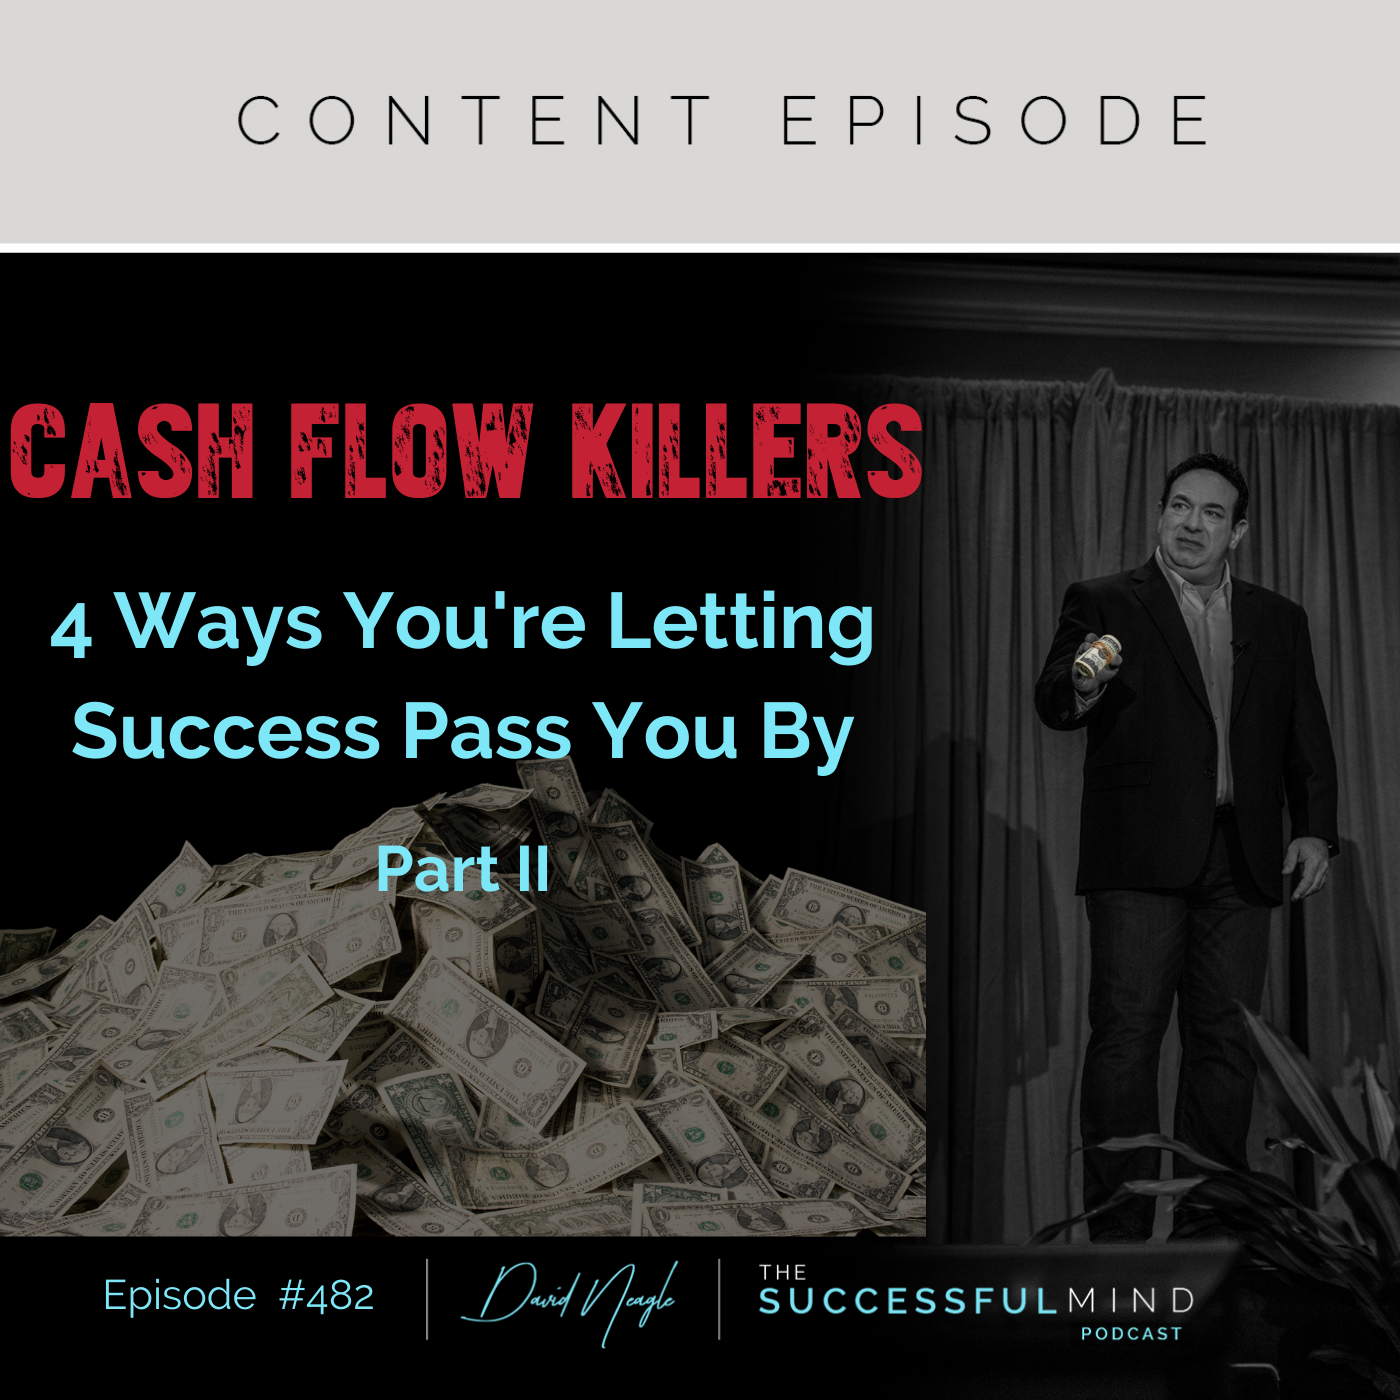 The Successful Mind Podcast – Episode 482 – Cash Flow Killers – 4 Ways You’re Letting Success Pass You By – Part II